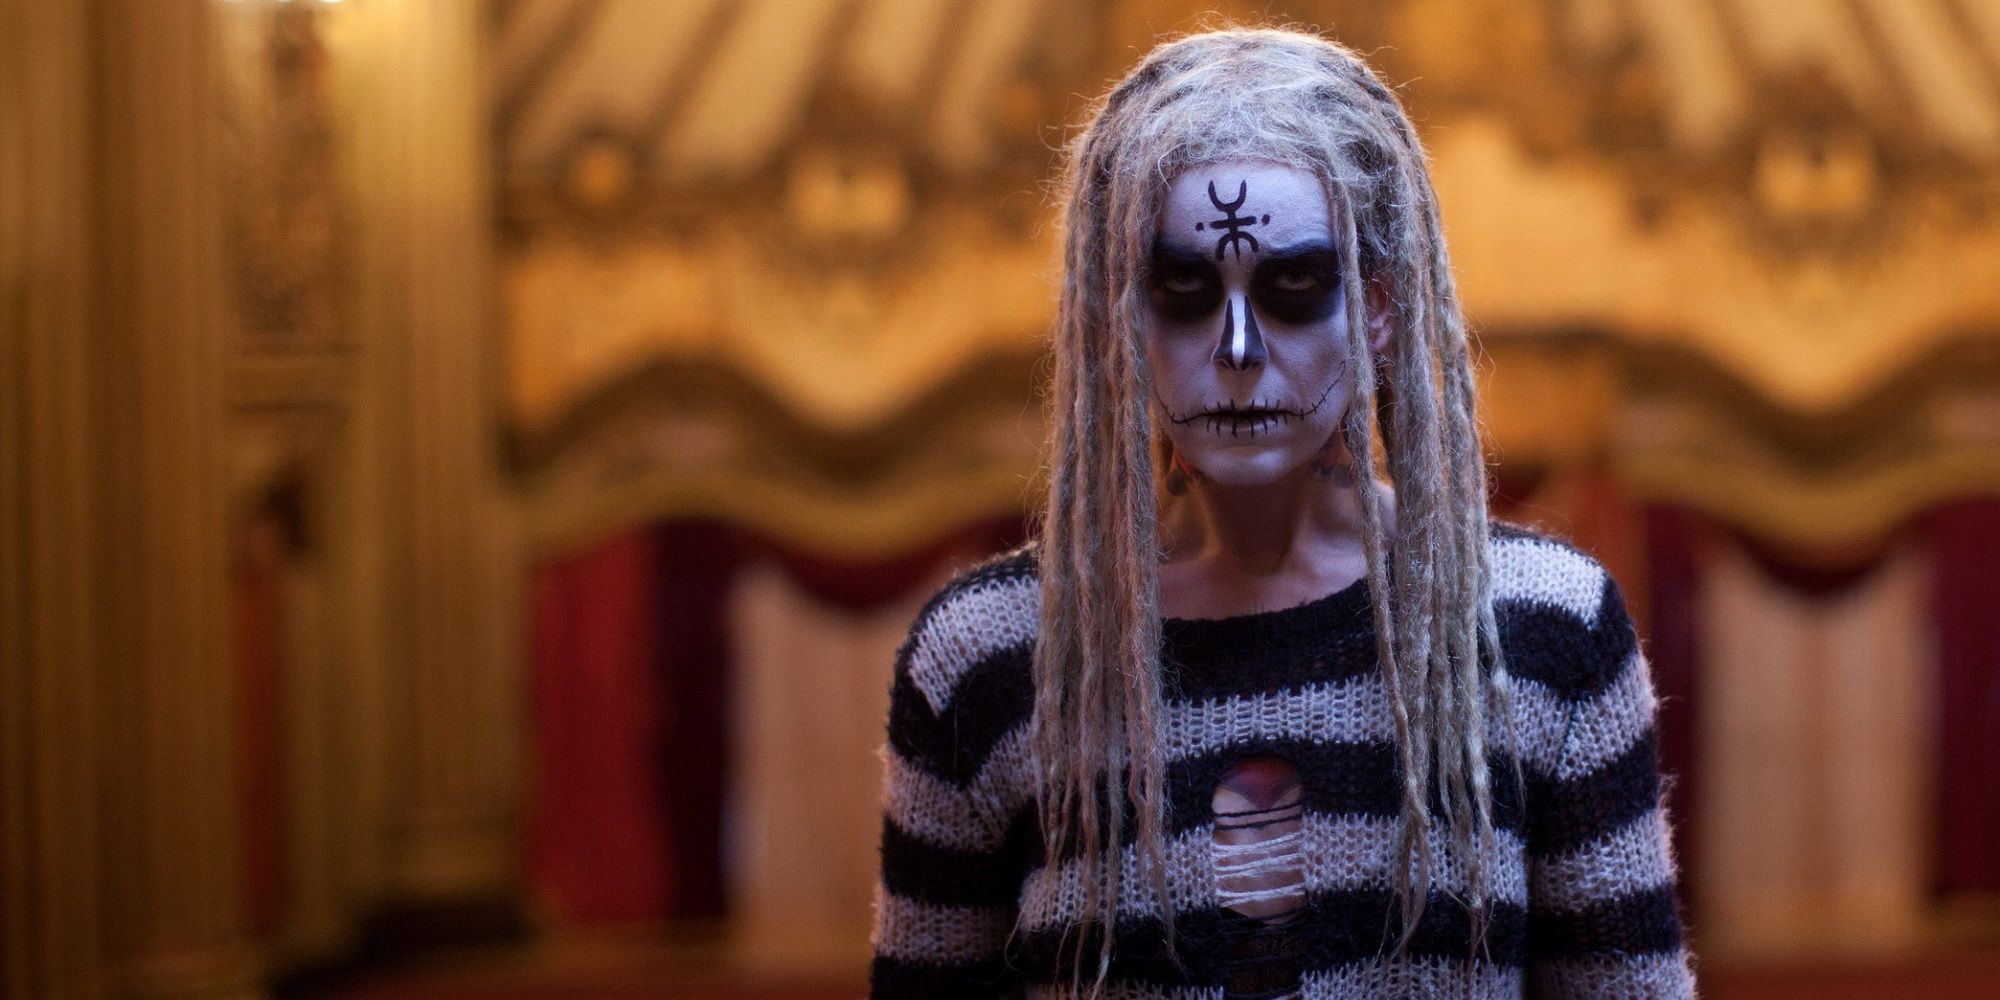 Heidi with white make-up on her face in The Lords of Salem